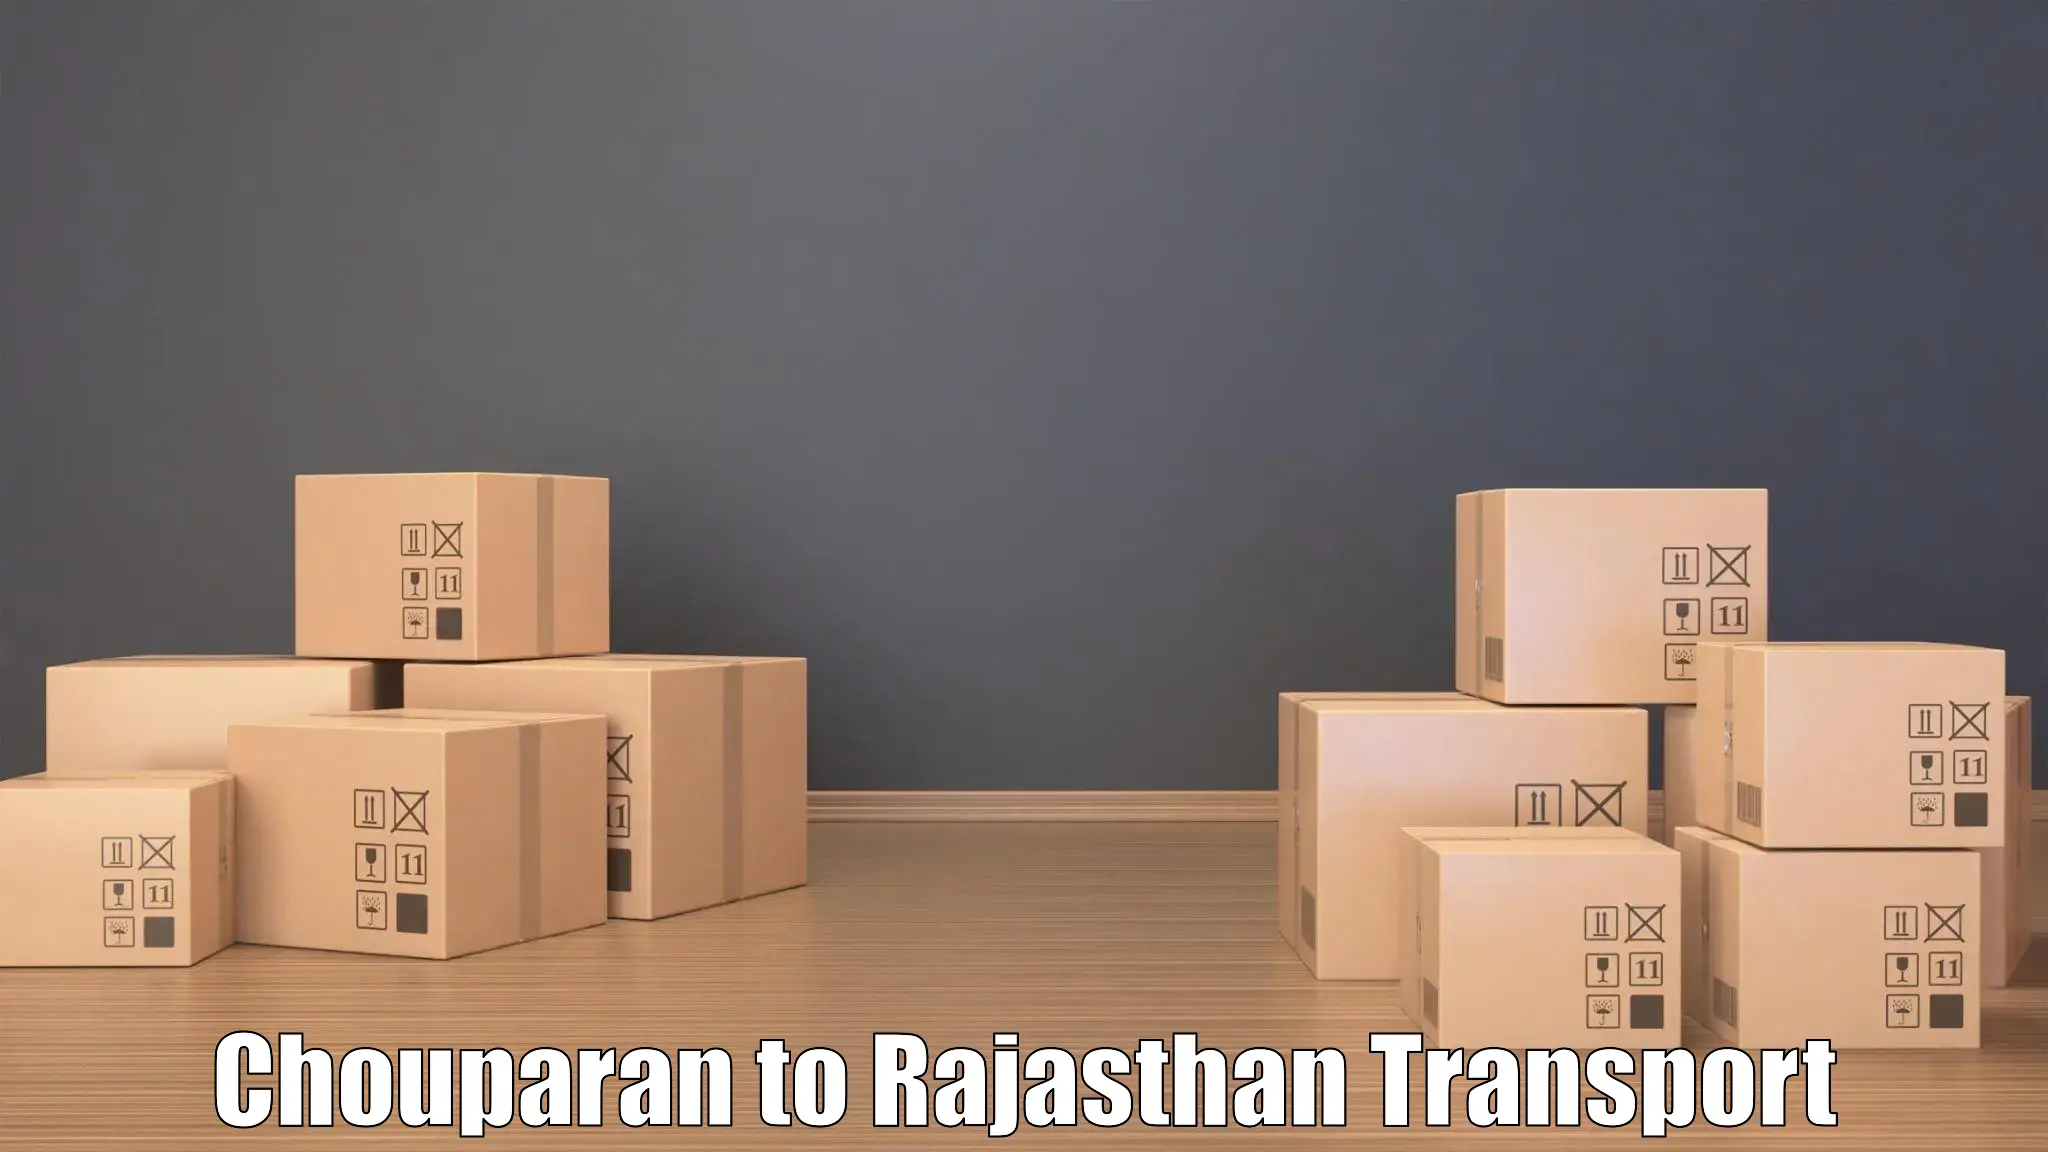 Luggage transport services Chouparan to Udaipurwati